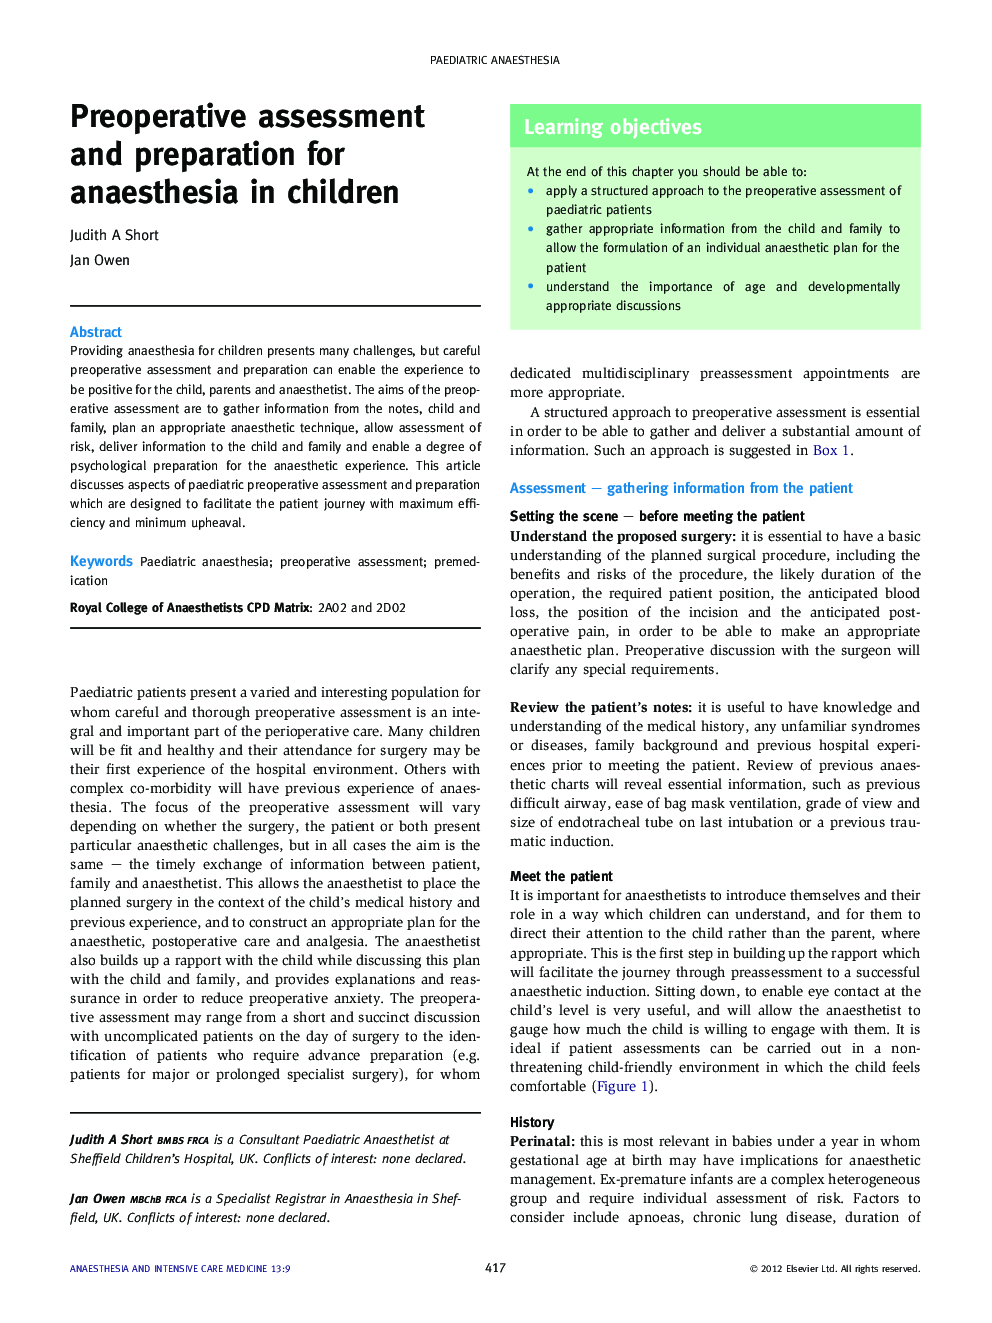 Preoperative assessment and preparation for anaesthesia in children